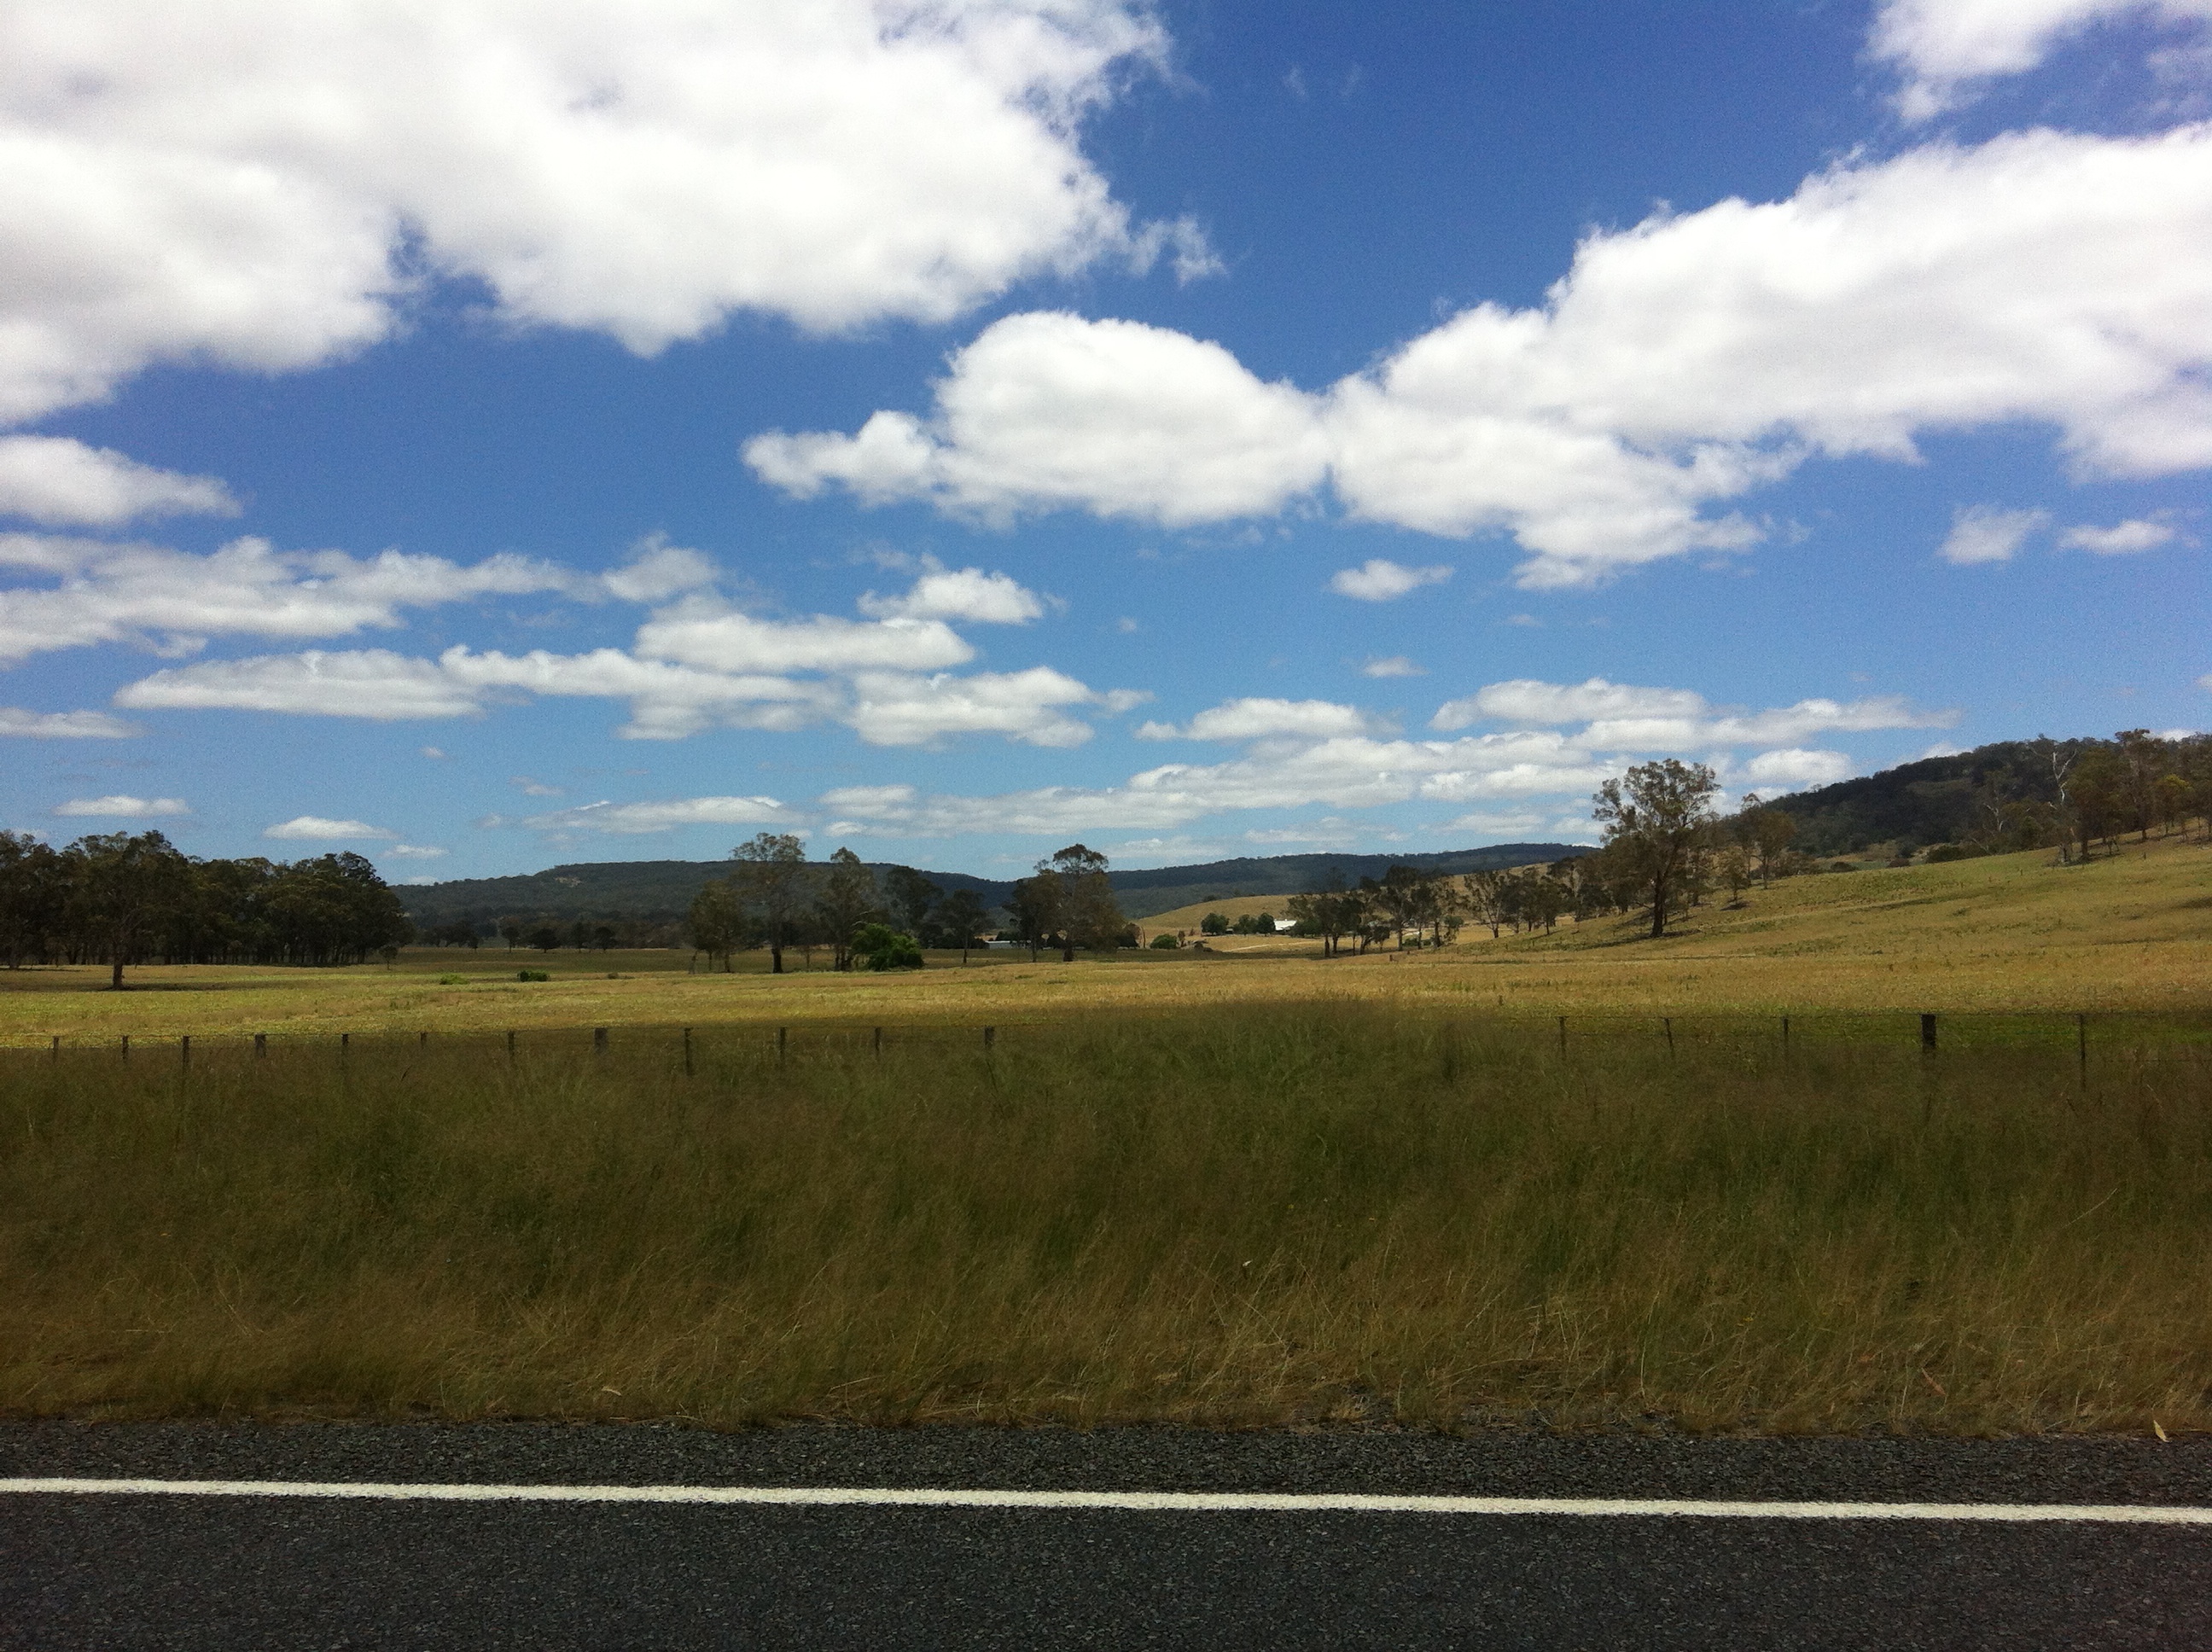 A grassy landscape with the linemarking on the side of the road in the foreground